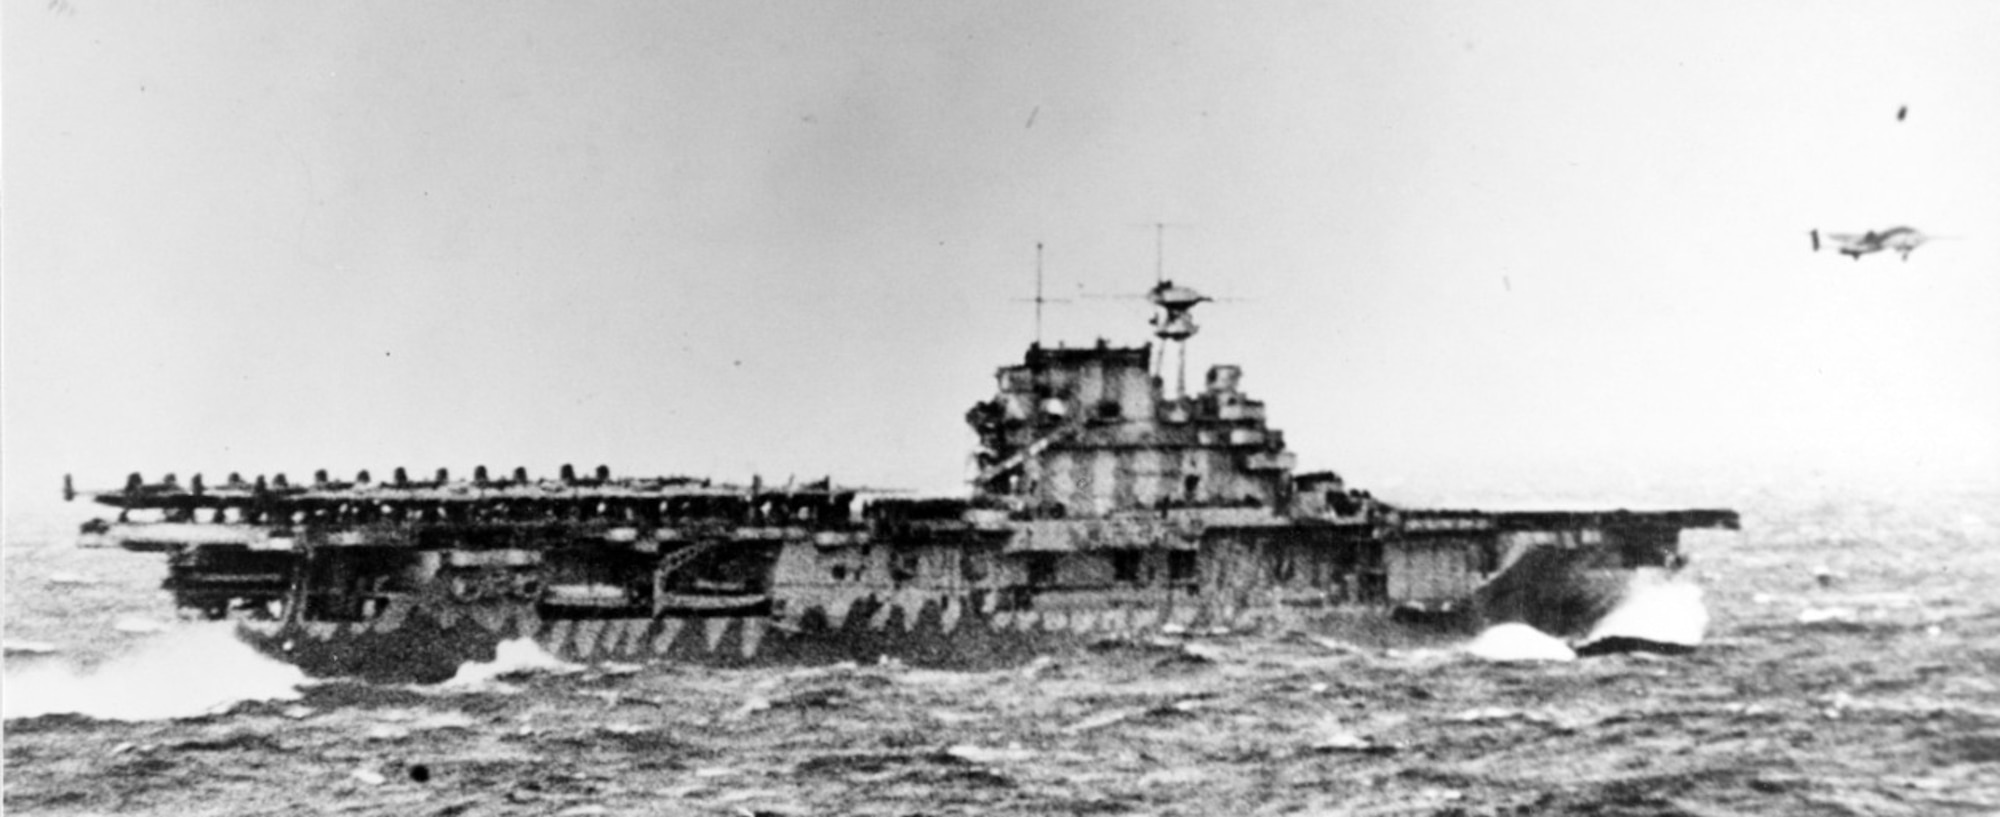 The USS Hornet, a U.S. Navy vessel, launches Doolittle's force at the start of the first U.S. air raid on the Japenese home lands. On 18 April 1942, airmen of the US Army Air Forces, led by Lt. Col. James H. (Jimmy) Doolittle, carried the Battle of the Pacific to the heart of the Japanese empire with a surprising and daring raid on military targets at Tokyo, Yokohama, Yokosuka, Nagoya, and Kobe. This heroic attack against these major cities was the result of coordination between the Army Air Forces and the US Navy, which carried the sixteen North American B-25 medium bombers aboard the carrier USS Hornet to within take-off distance of the Japanese Islands. Here, a pair of alert escorts follow the USS Hornet to protect her lethal cargo of B-25 bombers. (Courtesy Photo)